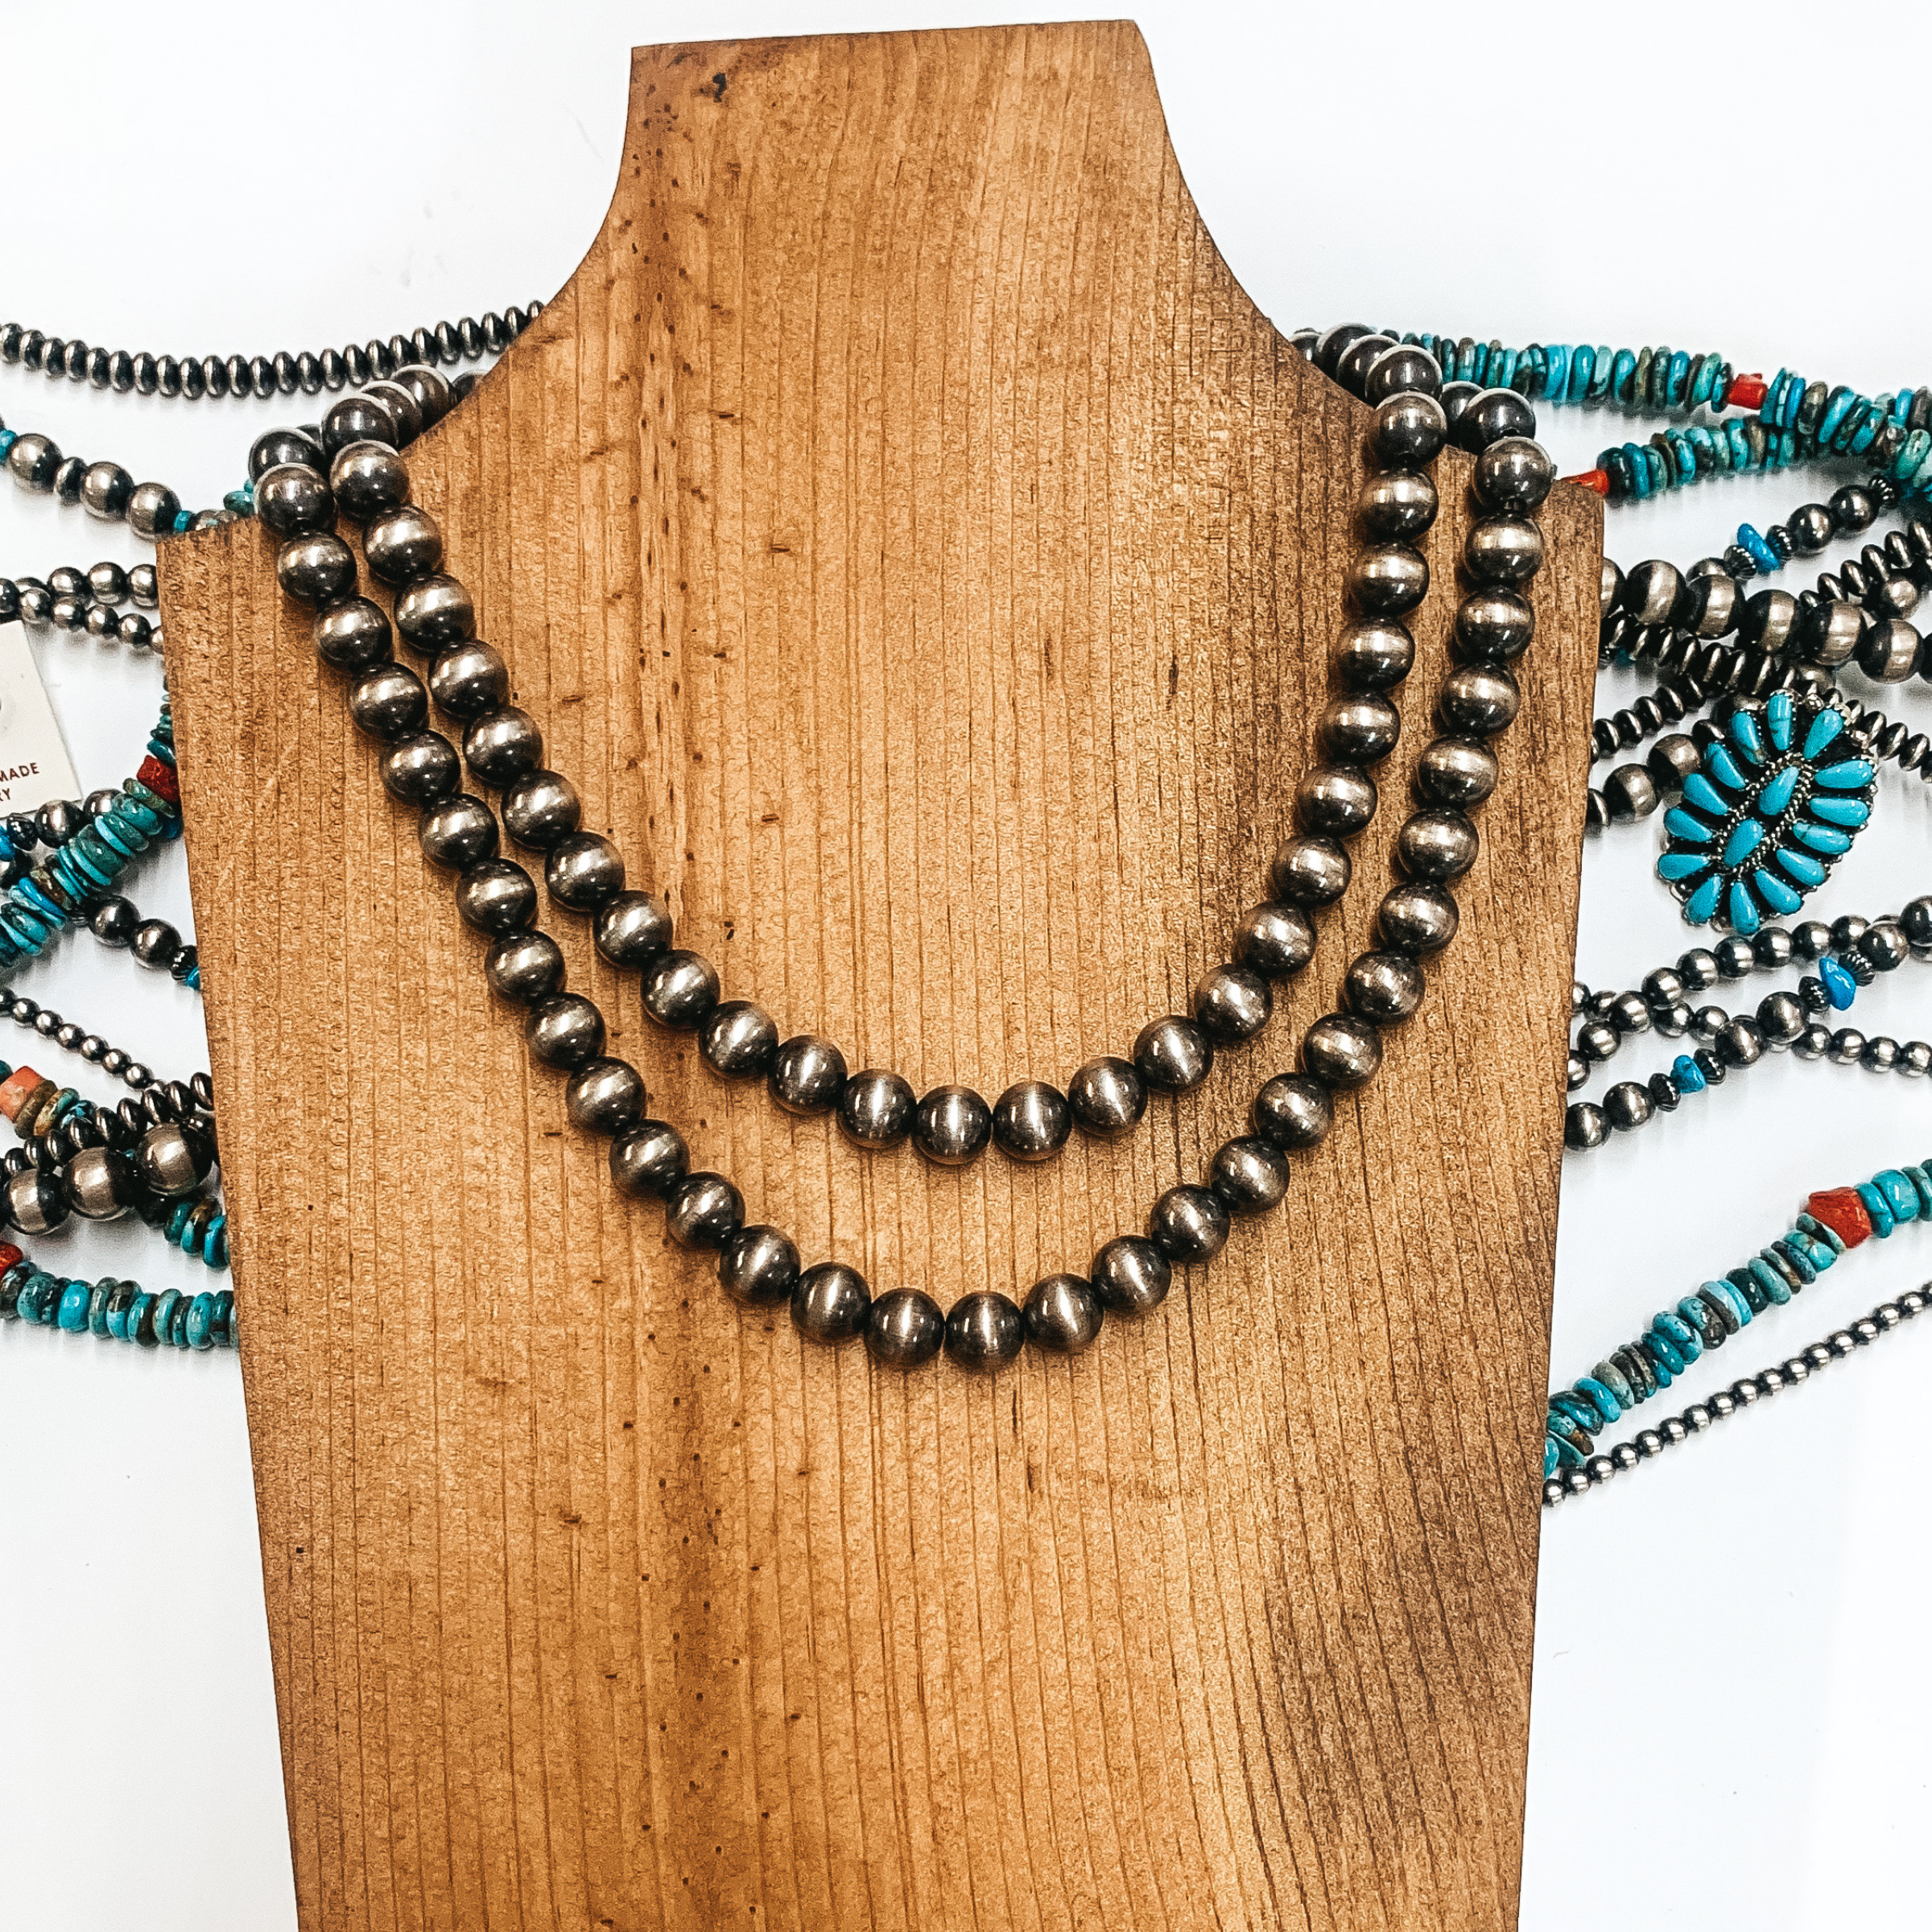 Navajo | Navajo Handmade 10 mm Navajo Pearls Necklace | Varying Lengths - Giddy Up Glamour Boutique